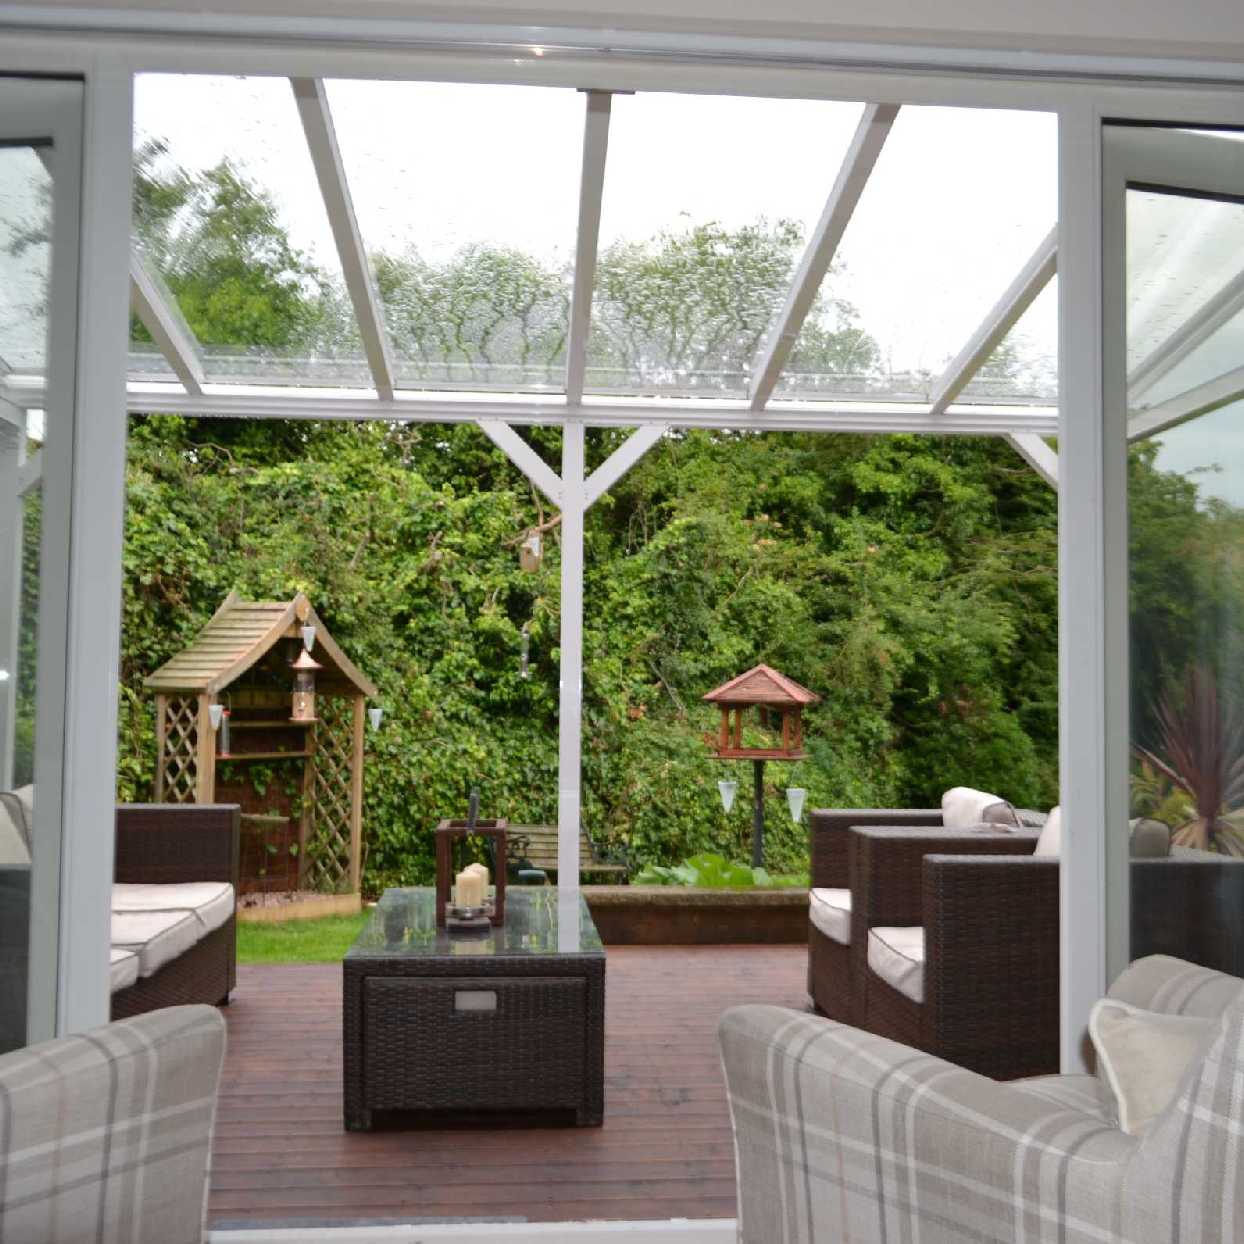 Great selection of Omega Smart Lean-To Canopy, White UNGLAZED for 6mm Glazing - 4.9m (W) x 2.5m (P), (3) Supporting Posts